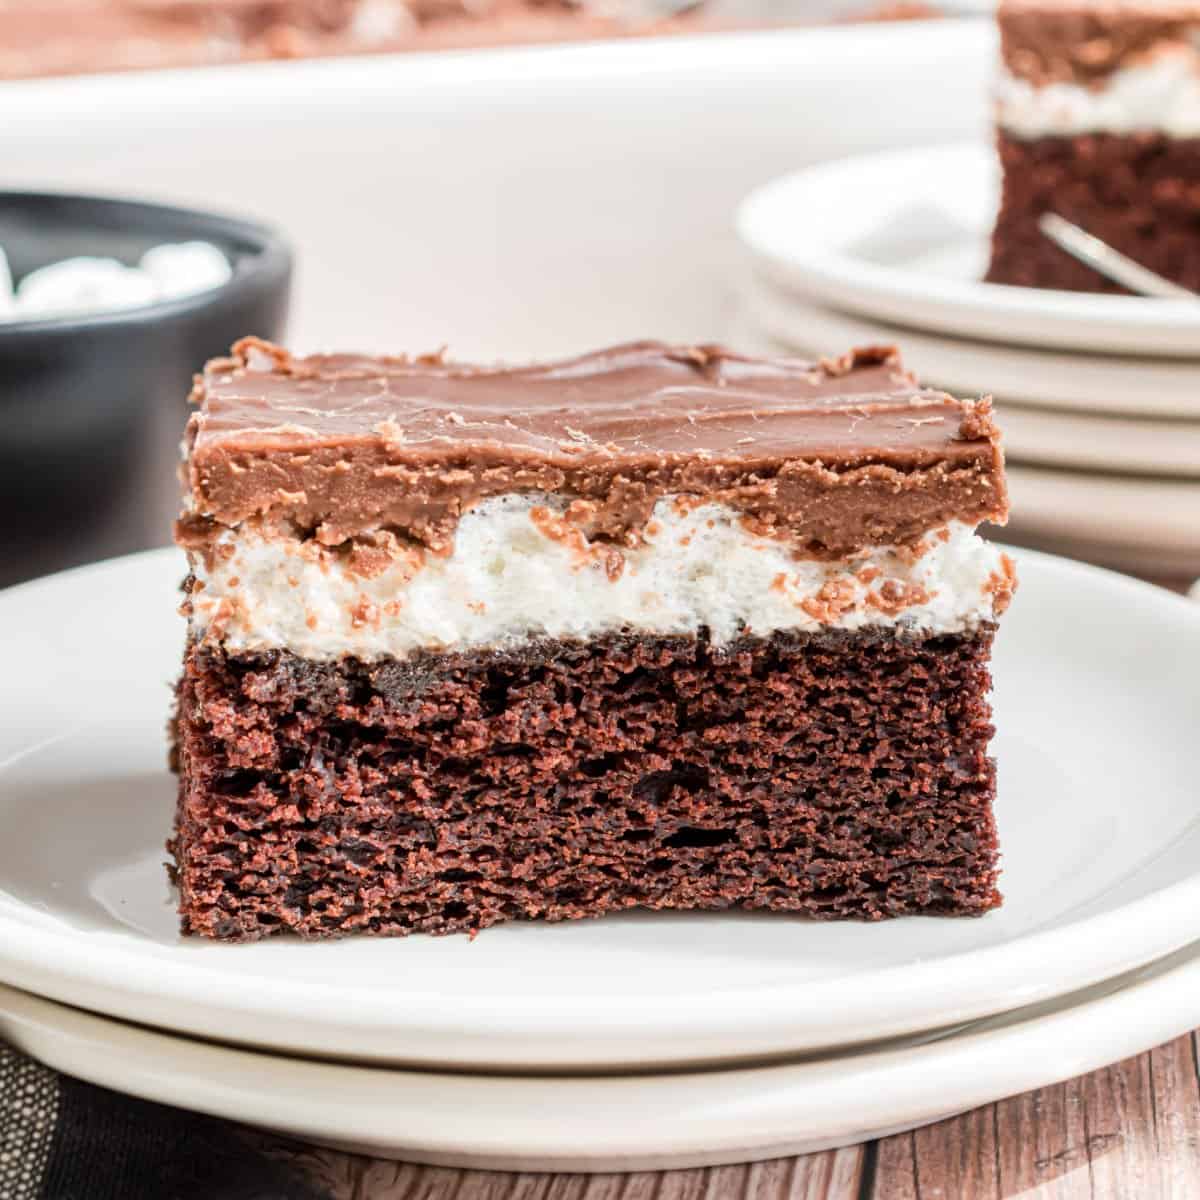 Slice of chocolate cake layered with melted marshmallow and fudgy frosting on a stack of white plates.